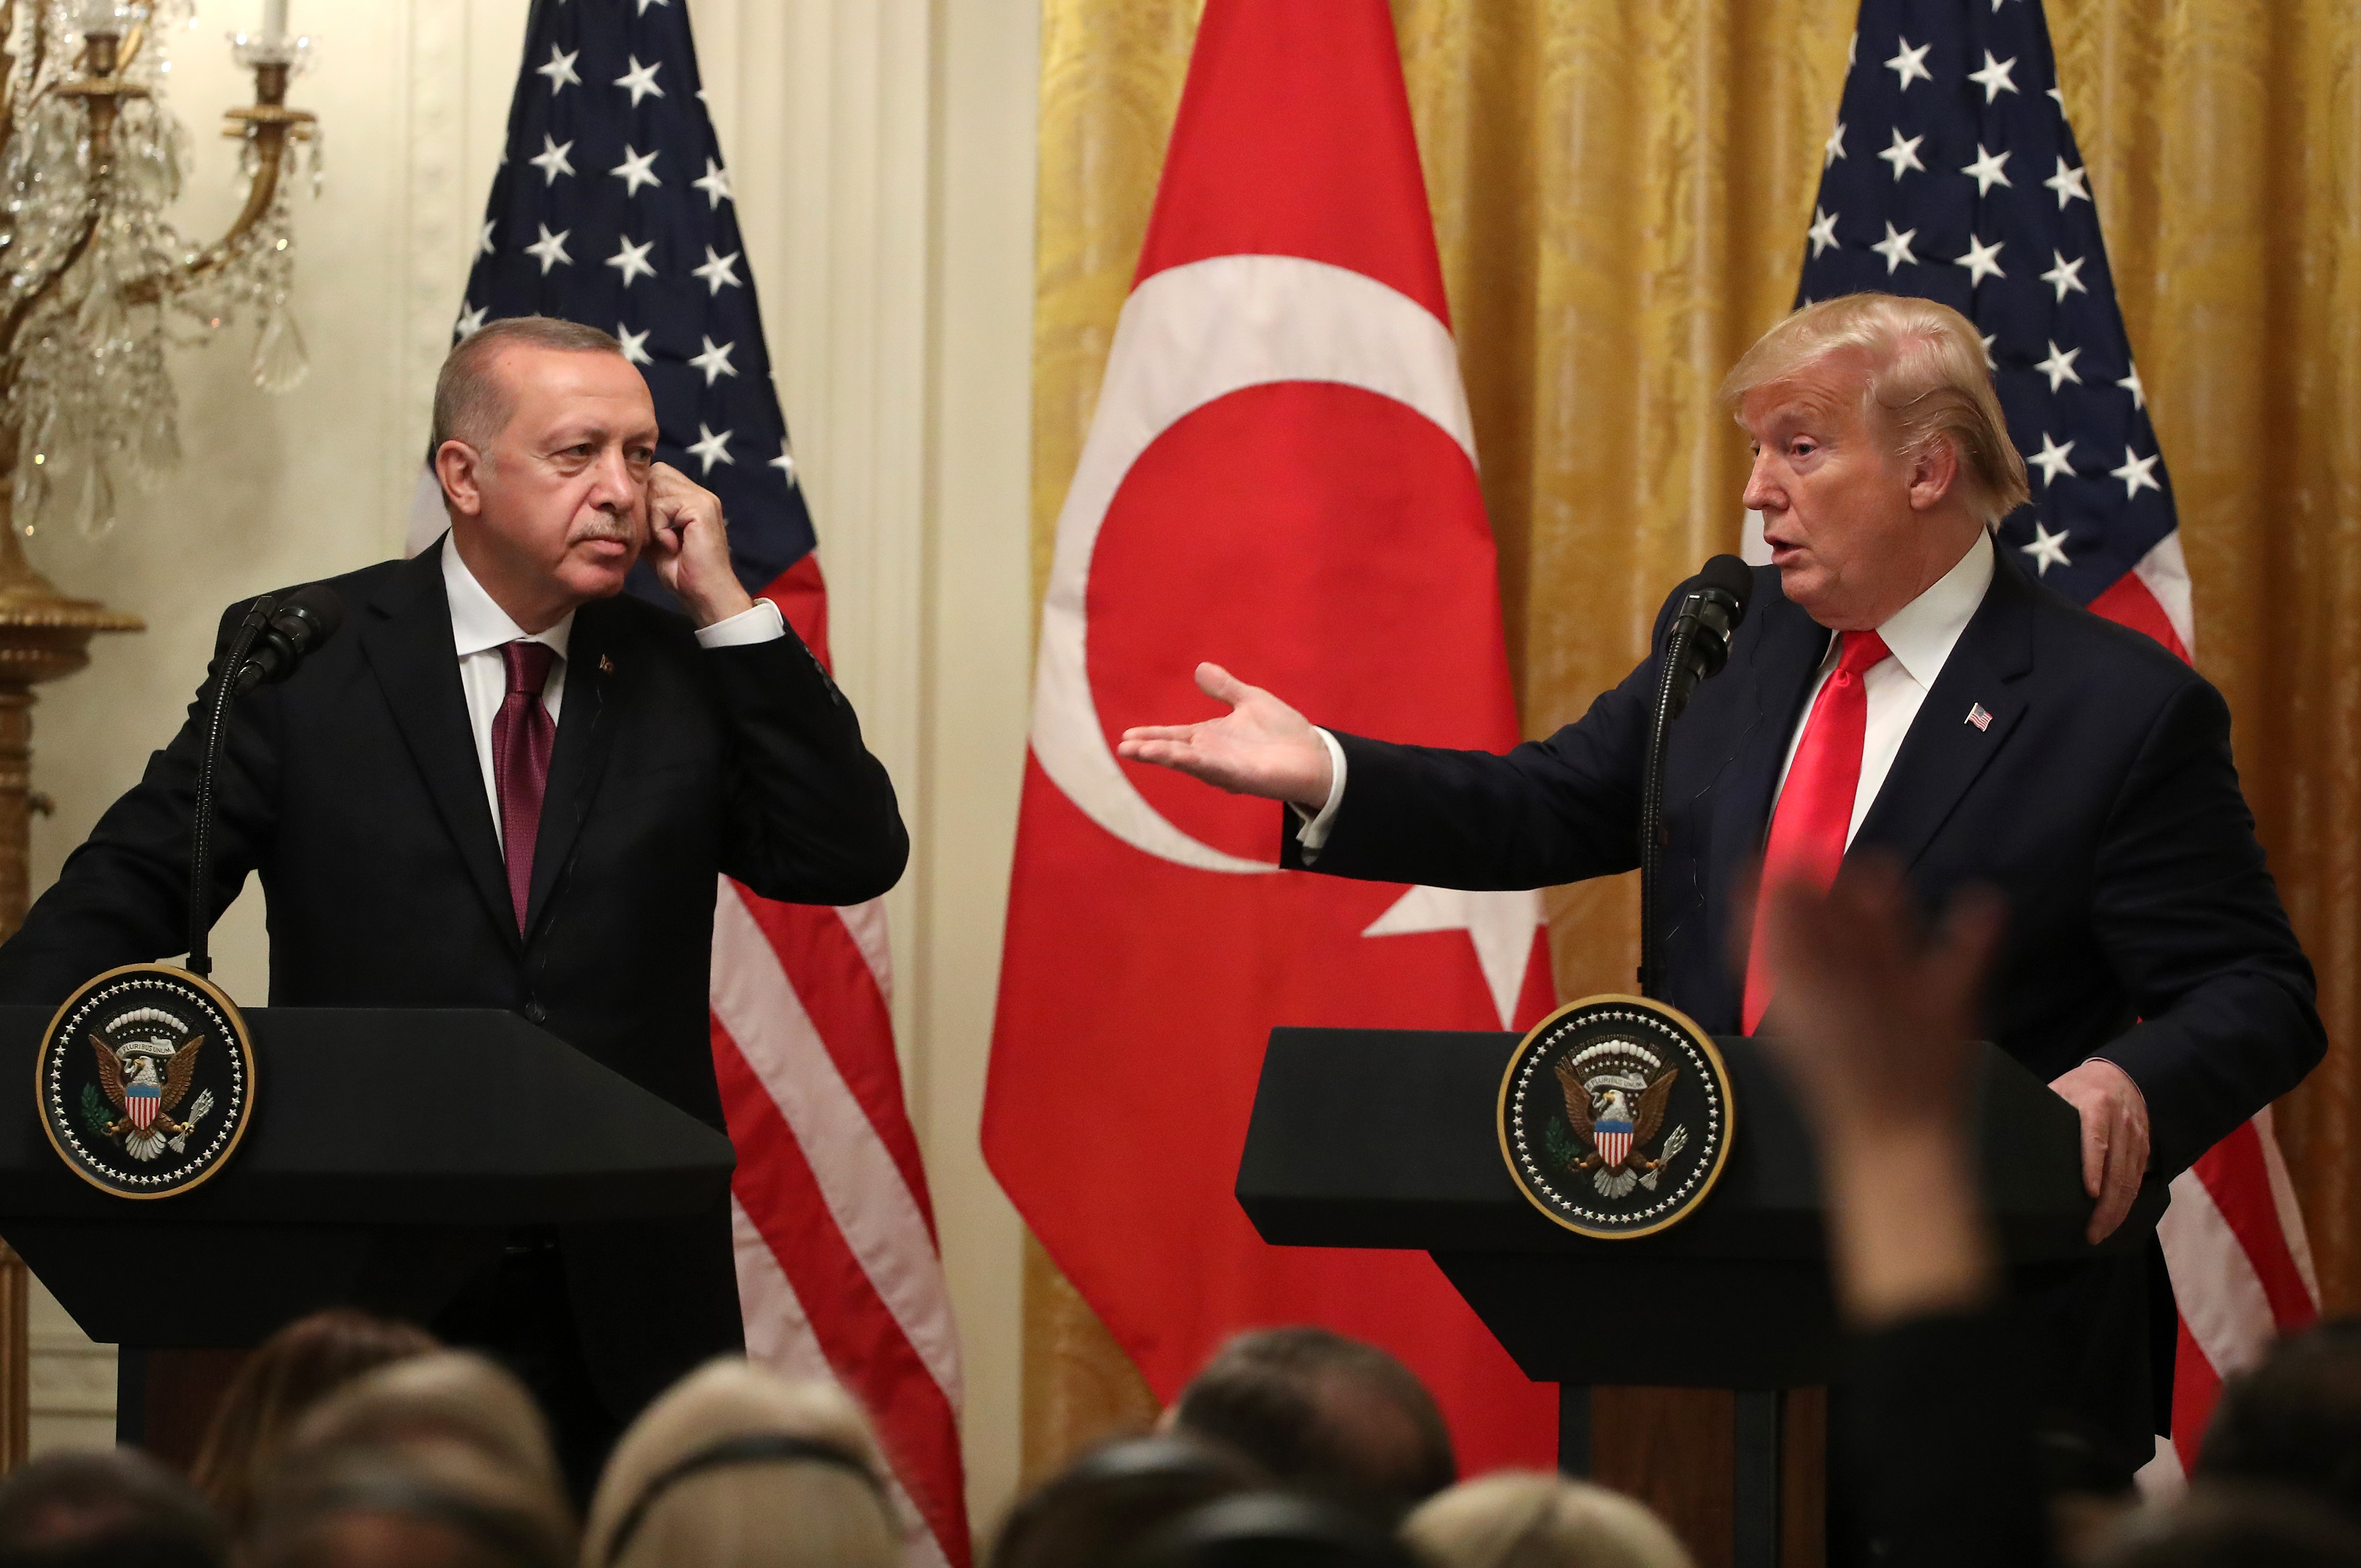 Trump showed he doesn’t understand Turkey — while standing next to Turkey’s president 2